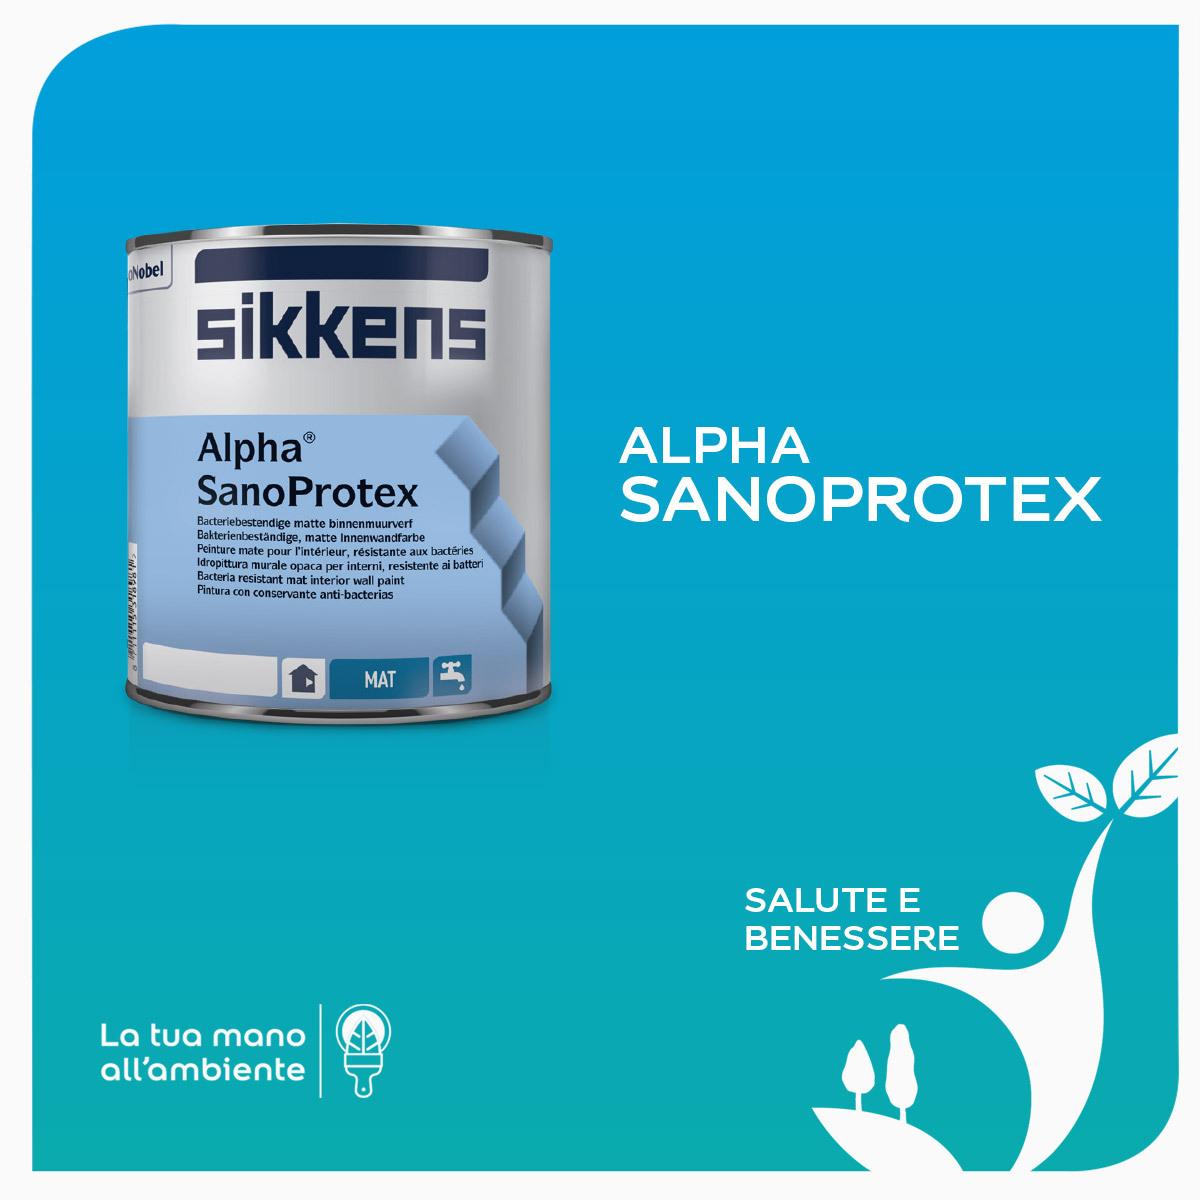 Pittura sanificante Sikkens